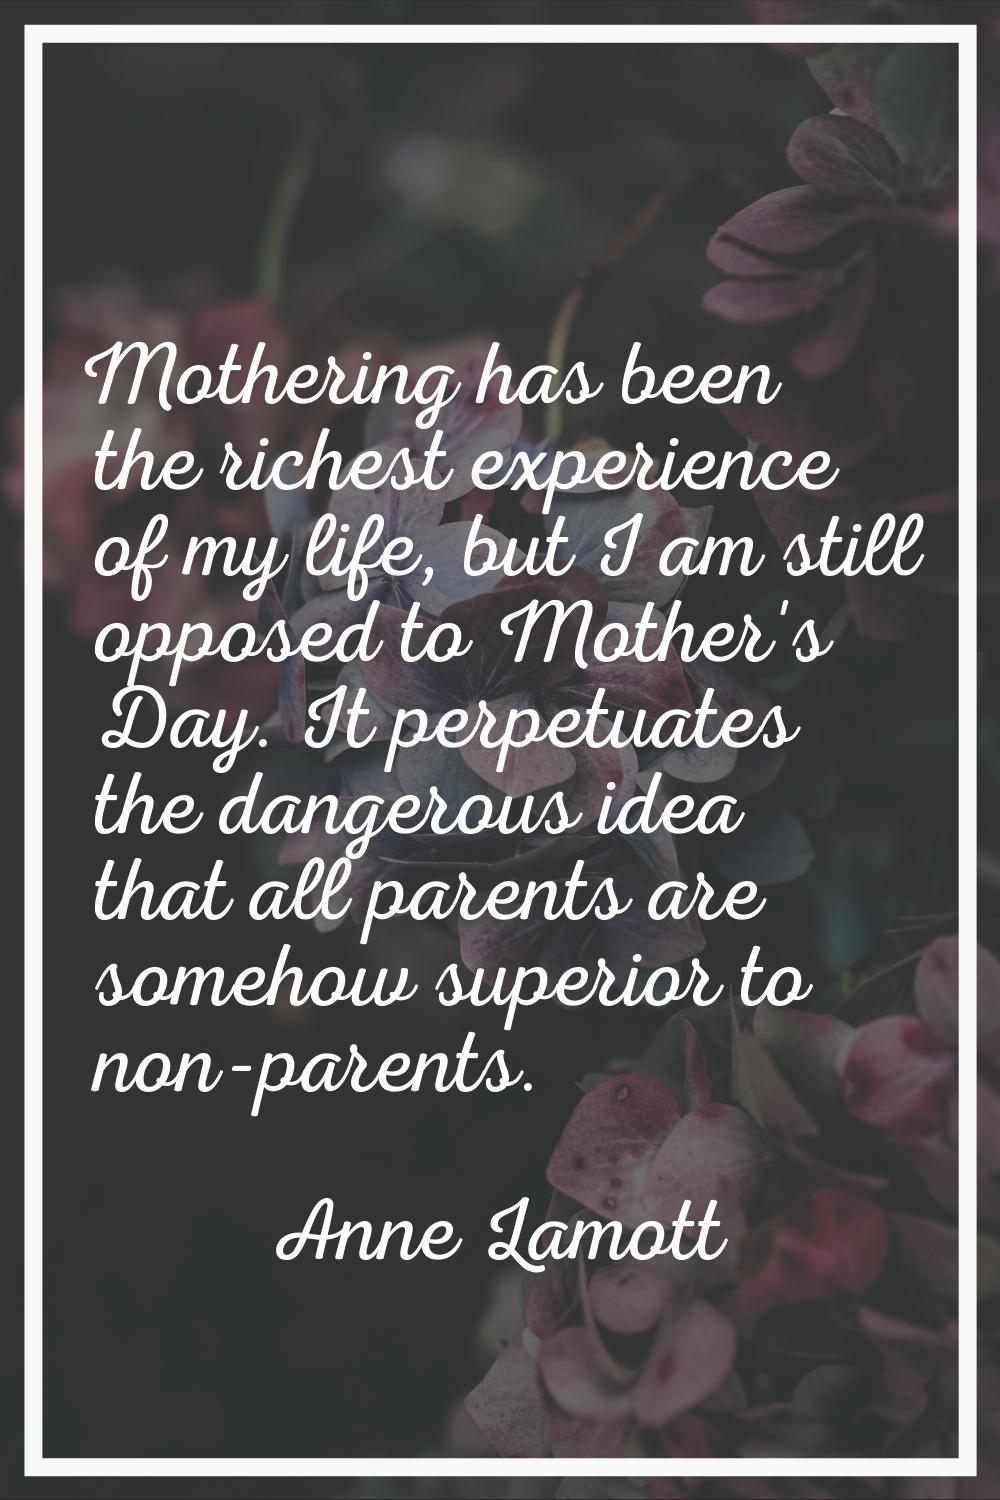 Mothering has been the richest experience of my life, but I am still opposed to Mother's Day. It pe